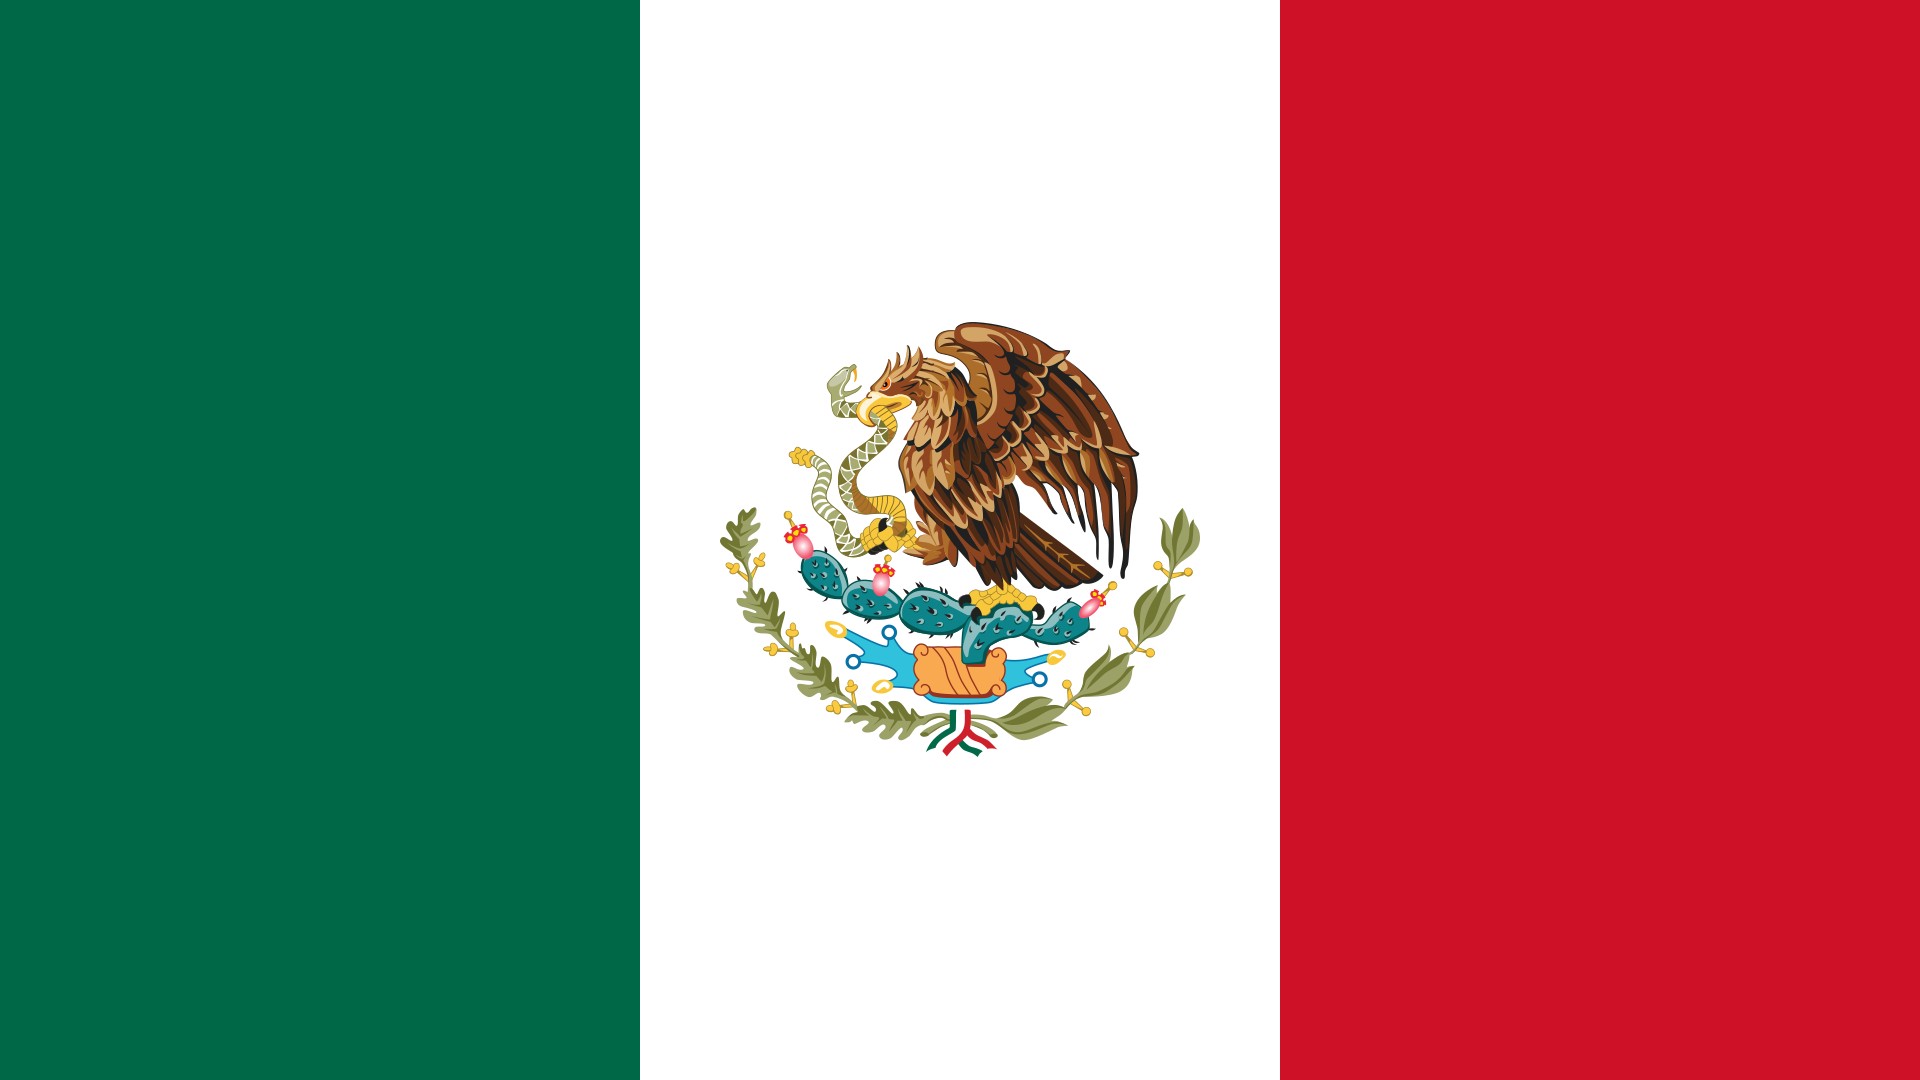 An image of the flag of Mexico